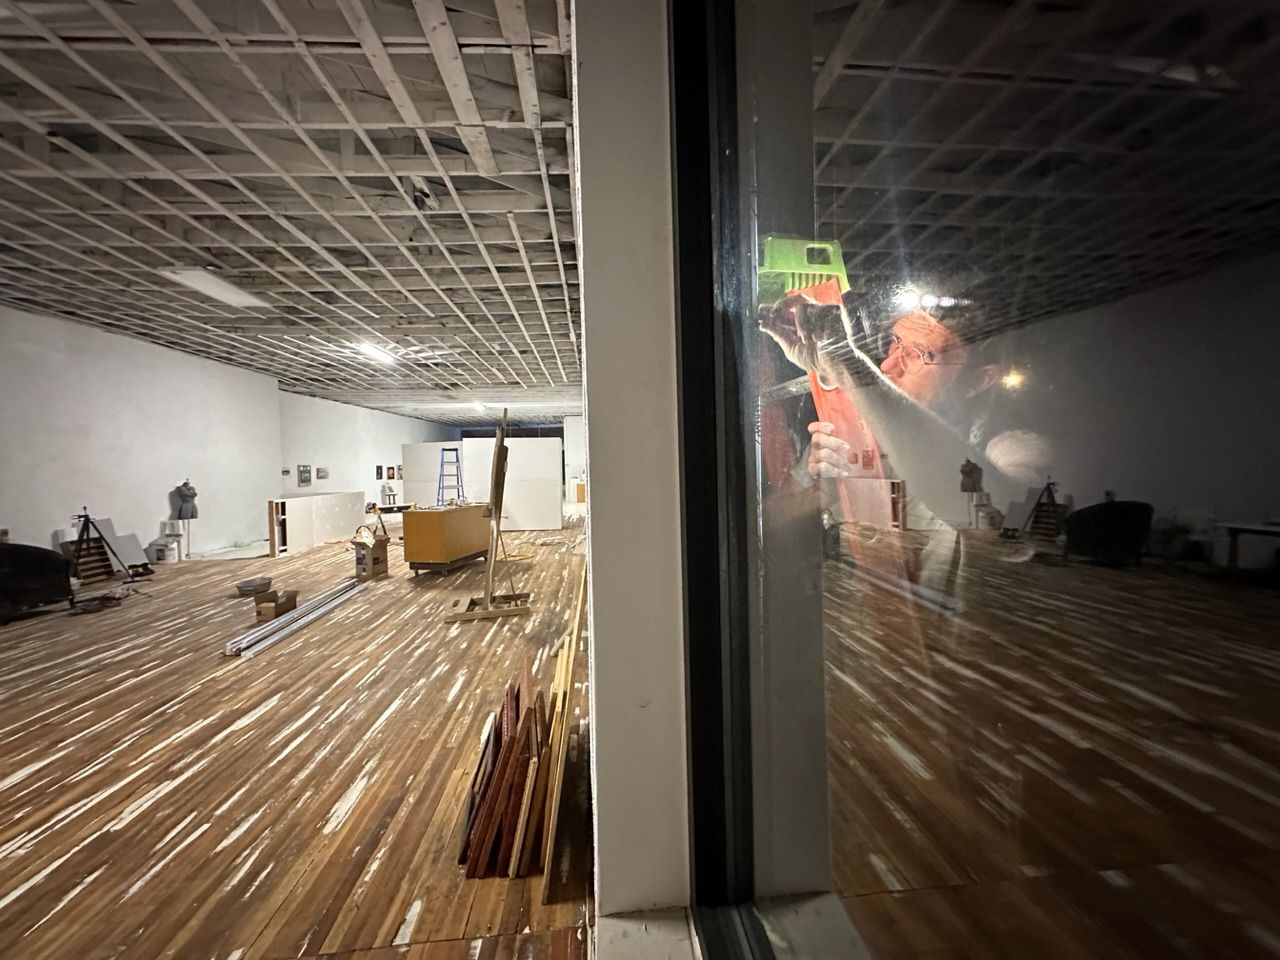 A slightly surreal image of a man on a ladder working on the outside of a window at night while the inside of a white walled, wood flowed room is well lit inside